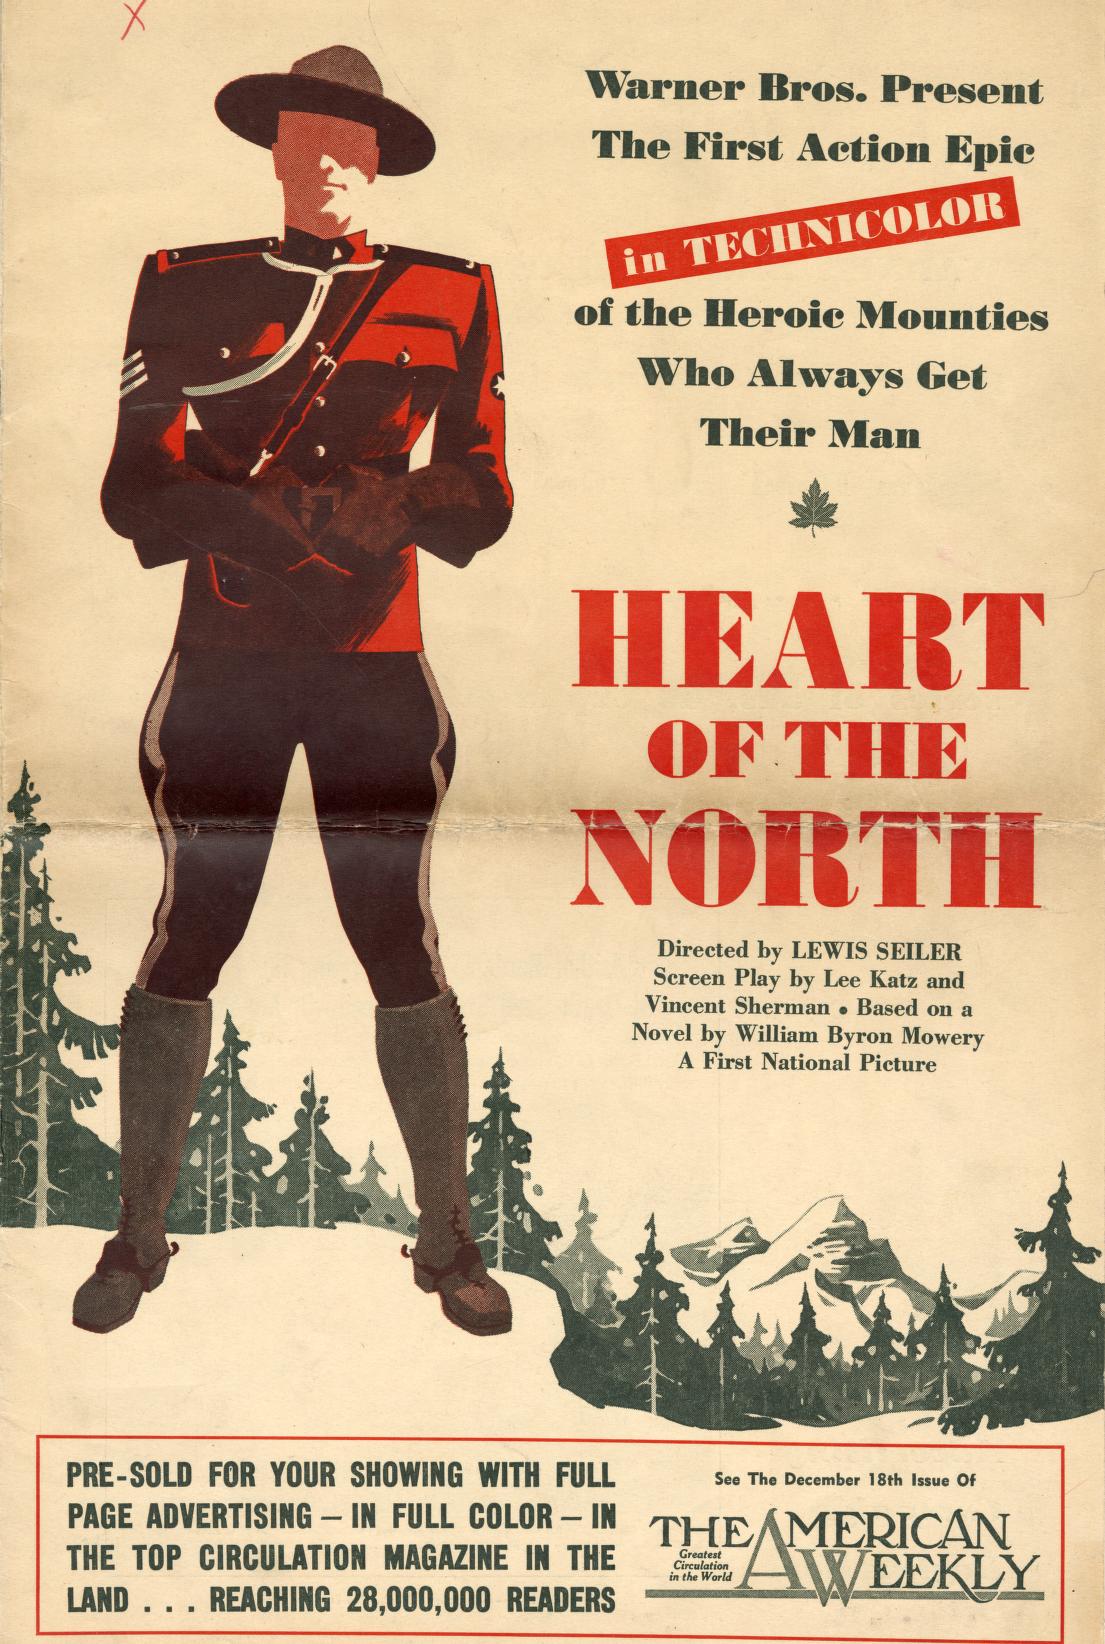 Heart of the North (Warner Bros.)